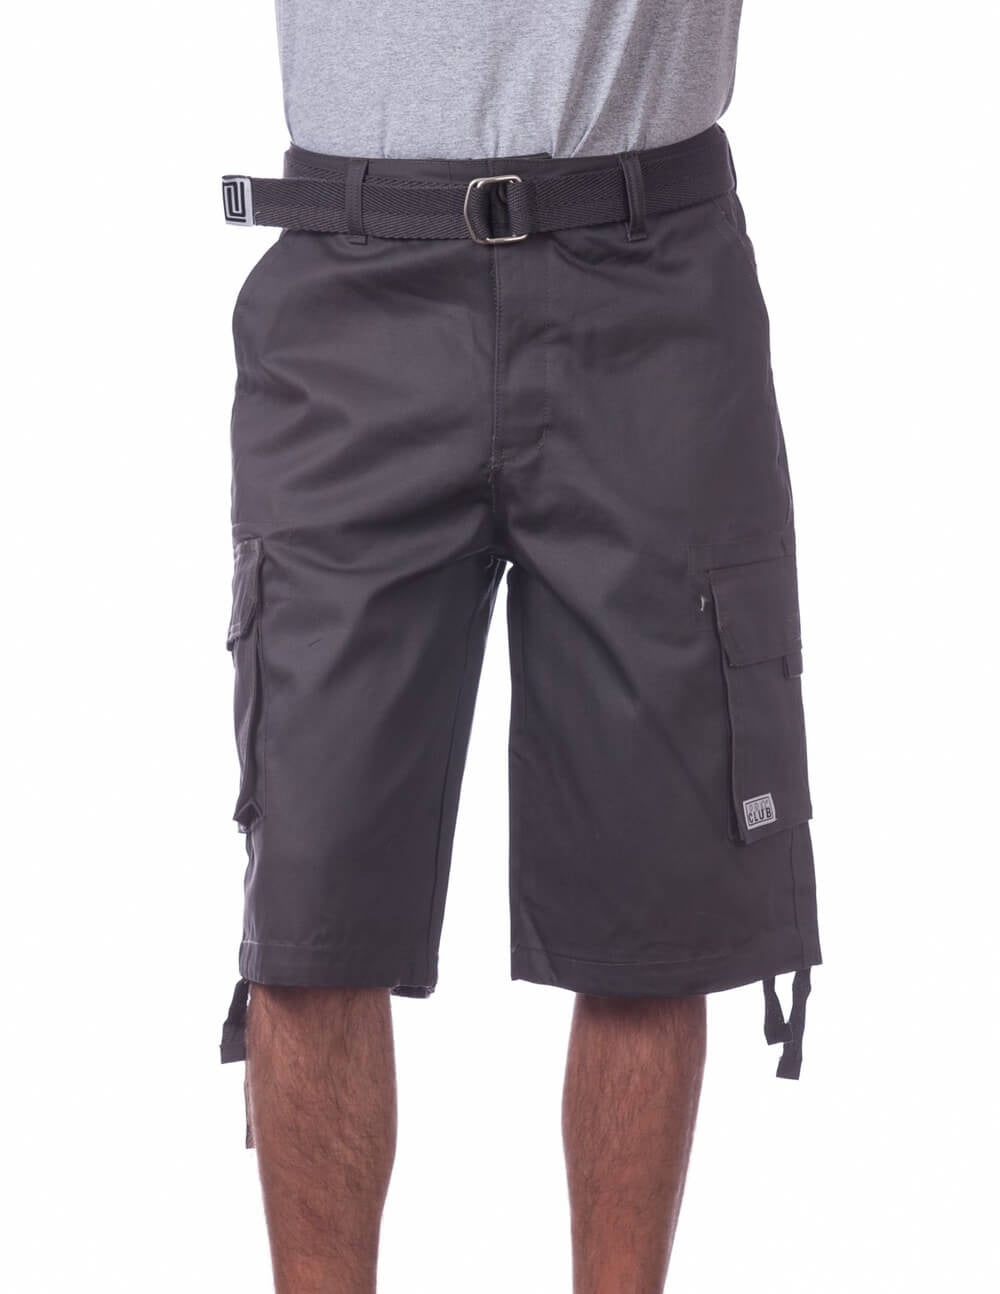 Pro Club - Twill Cargo Shorts with Belt - Charcoal